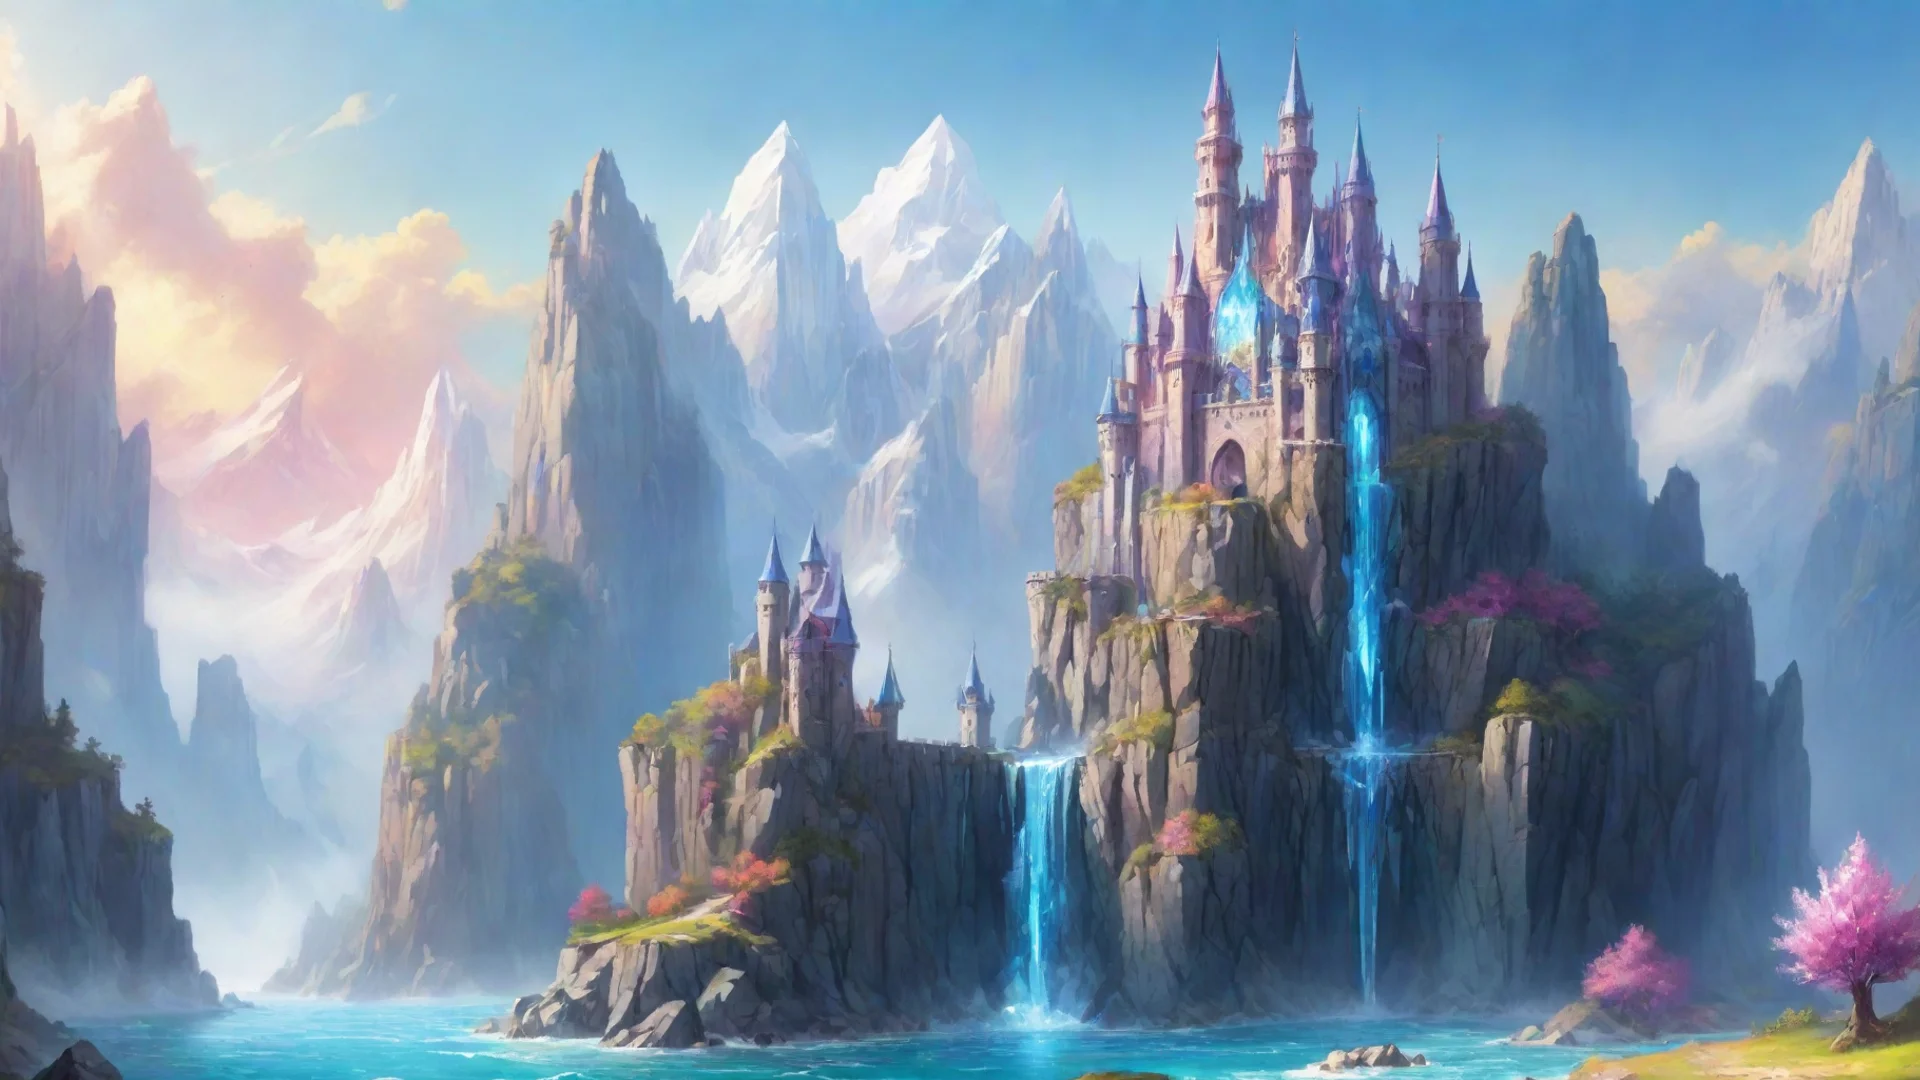 aiamazing castle fantasy landscape with giant crystal build on giant crystal cliffs bright colors fantasy awesome portrait 2 wide